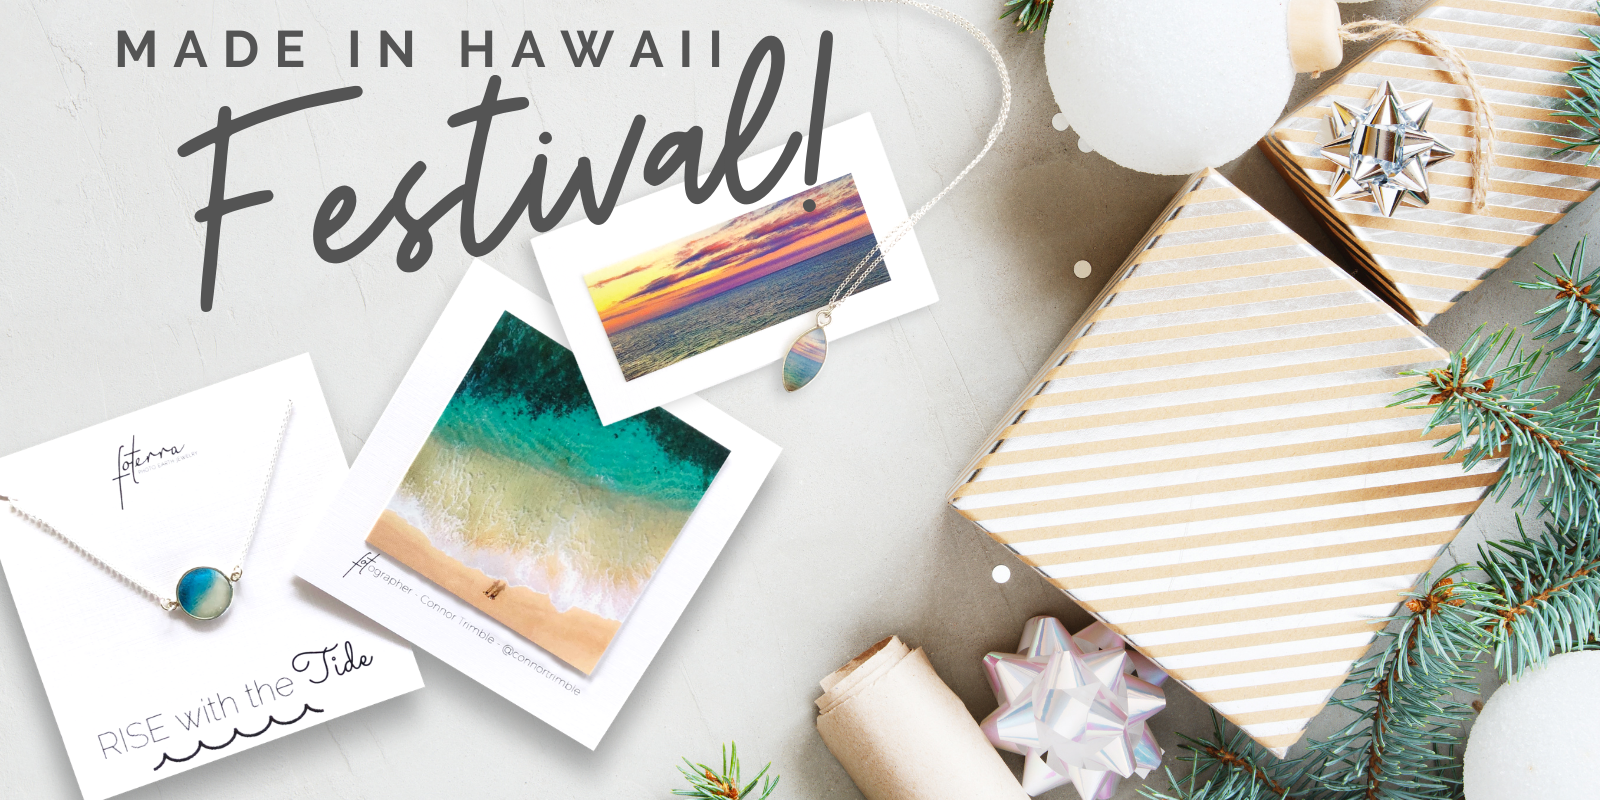 Get Your Holiday Shopping Done at the Made in Hawaii Festival